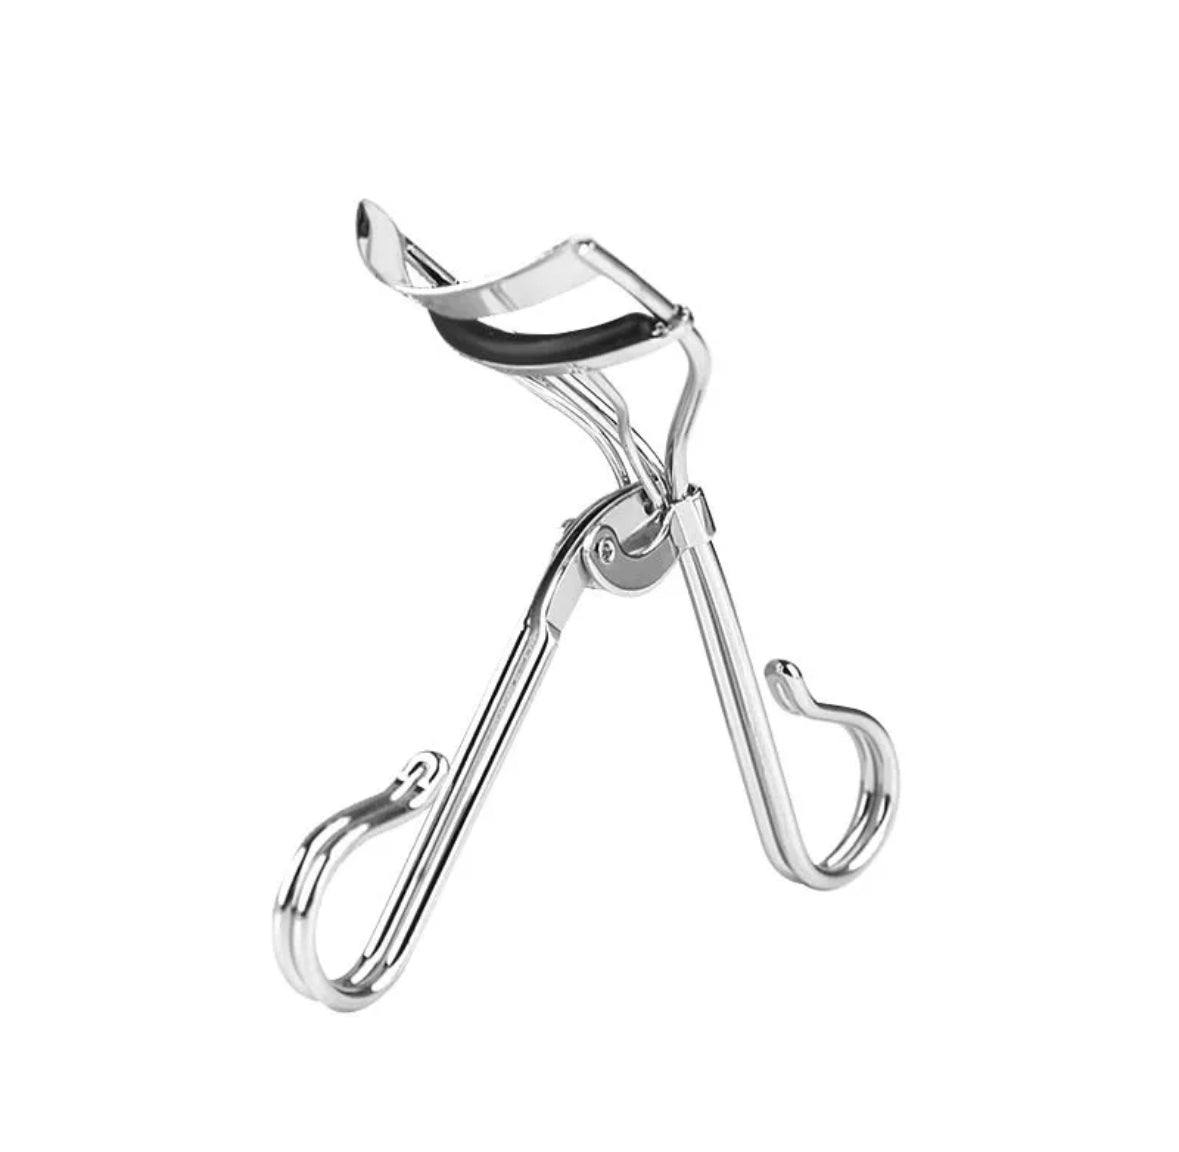 Stainless Steel Eyelash Curler with Silicone Pad